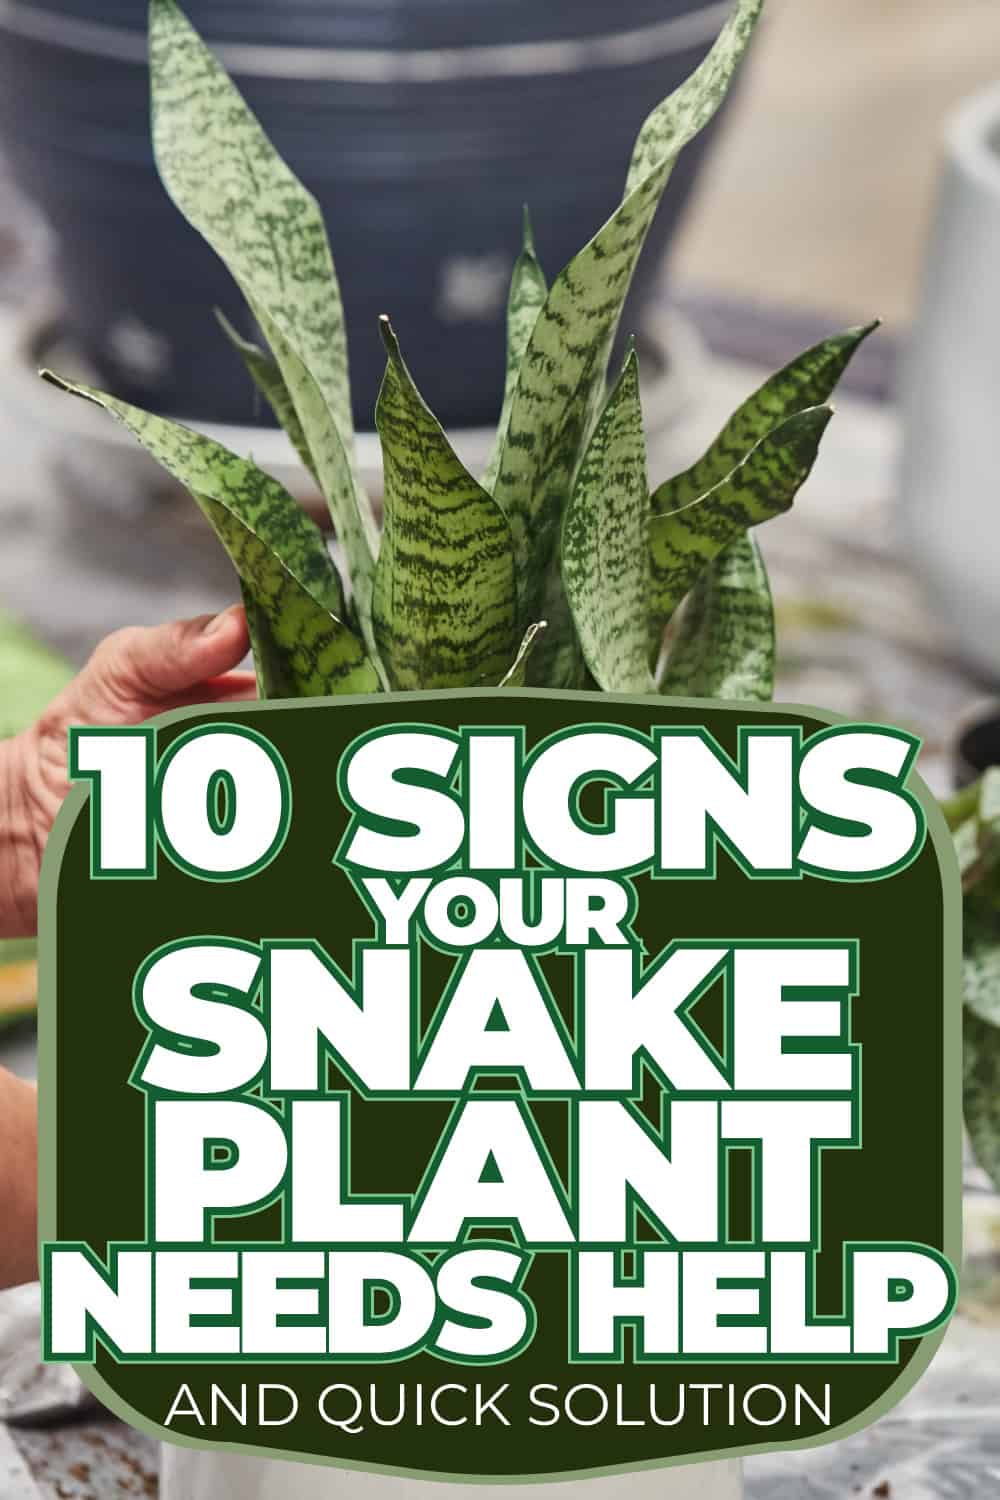 10 Signs Your Snake Plant Needs Help (And Quick Solutions!)